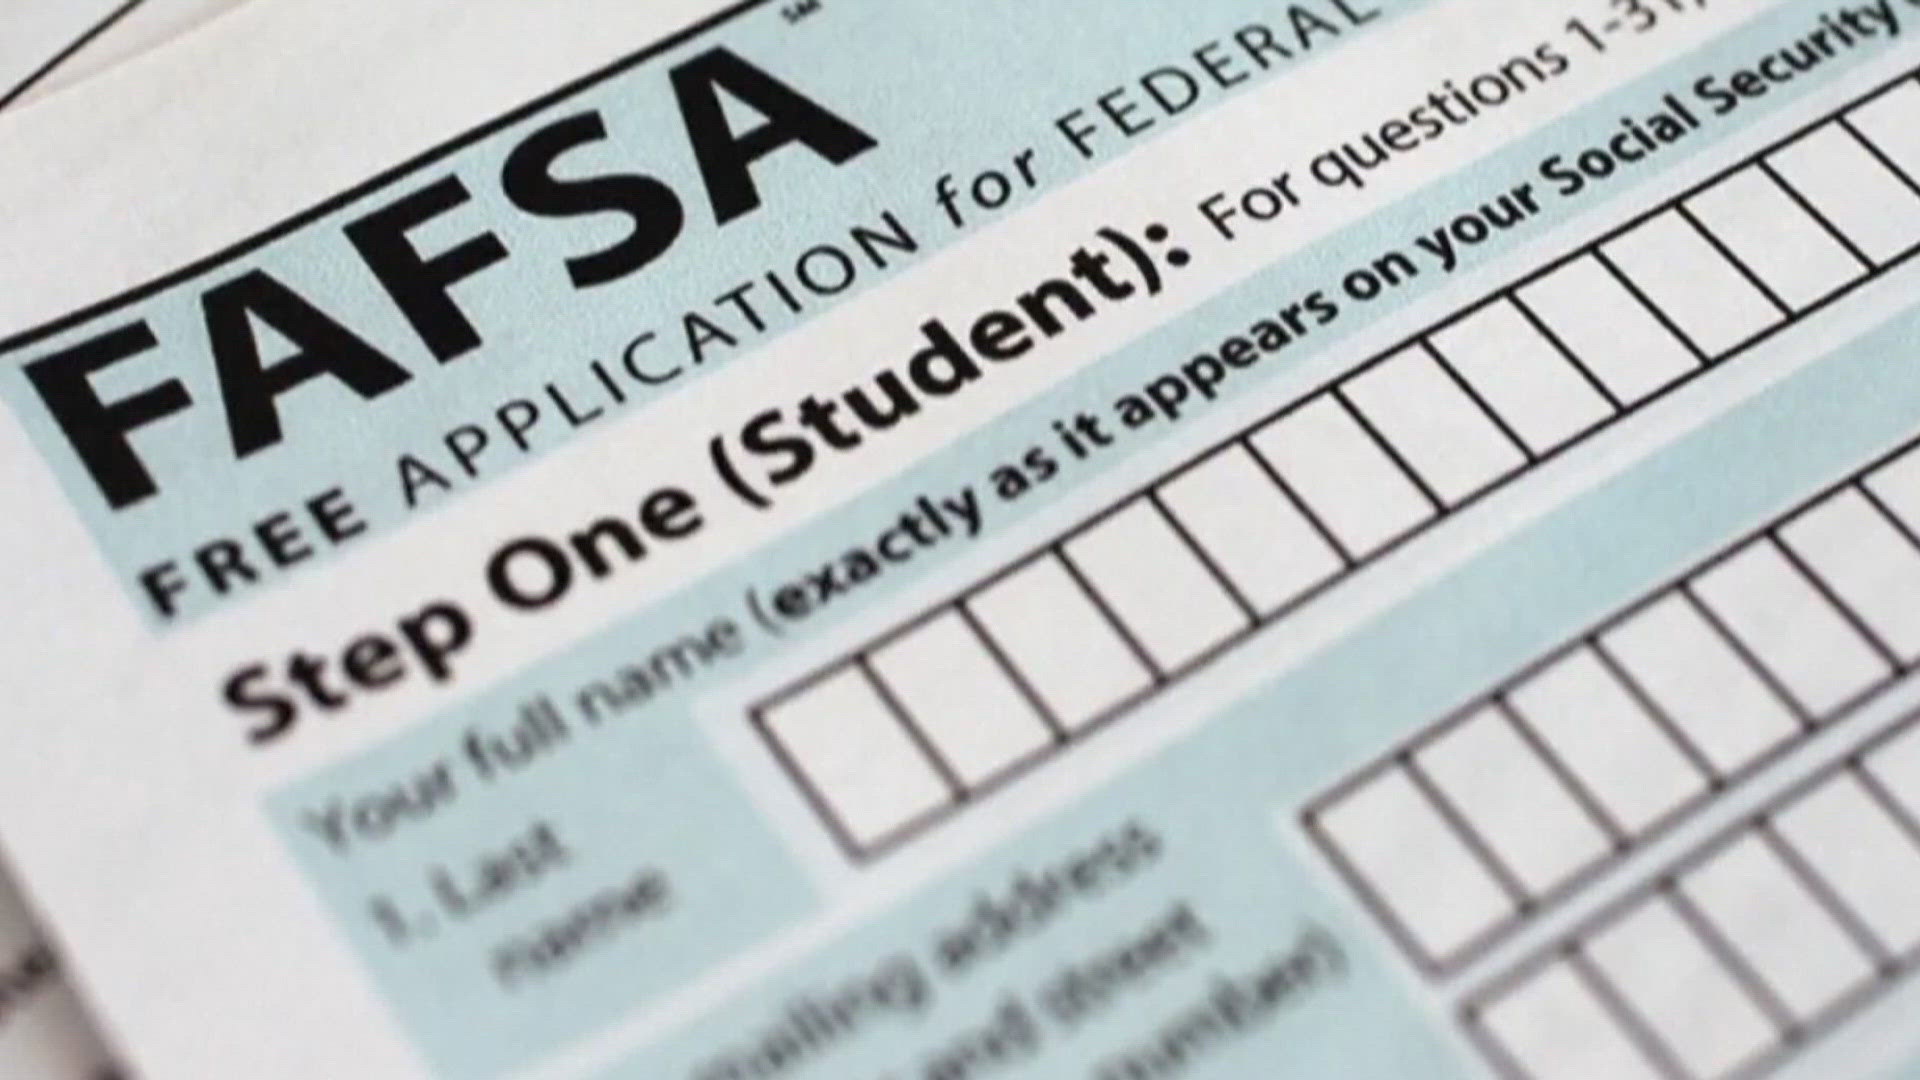 The Department of Education is overhauling the form to make it easier to fill out, but students are still waiting for the new version to be released.